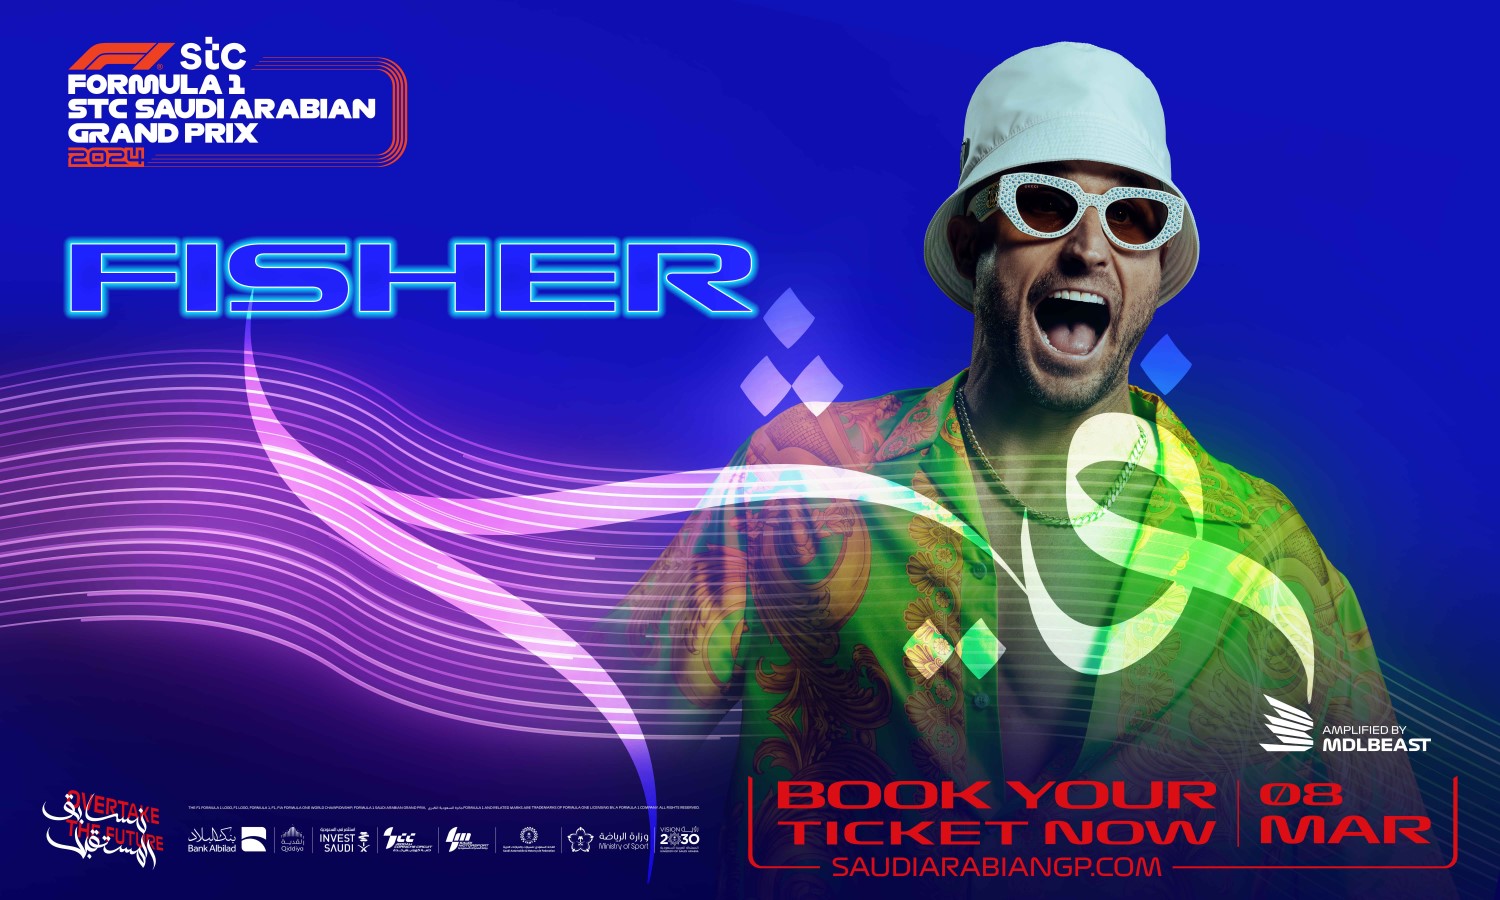 The Saudi Motorsport Company (SMC) - Promoter of the FORMULA 1 STC SAUDI ARABIAN GRAND PRIX 2024 announced that superstar Australian DJ, FISHER, will headline the post-race concert on the Jeddah Corniche Circuit Main Stage on Friday March 8th after the conclusion of the all-important F1 Qualifying session. Photo supplied by Saudi Arabian GP/SMG